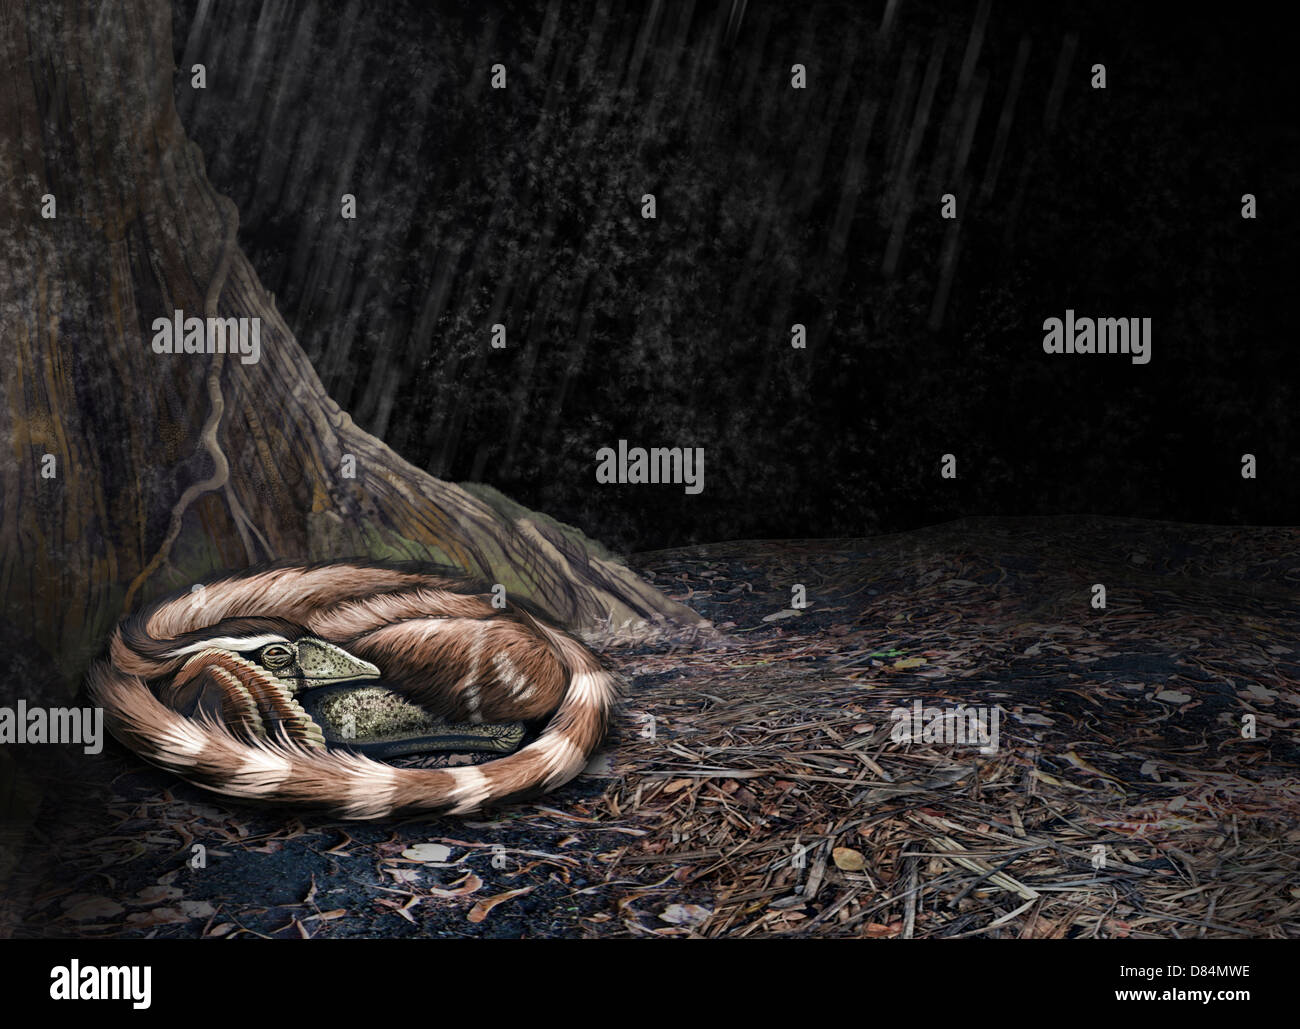 A Mei long curls up beside the roots of a tree to shelter from the rain Stock Photo